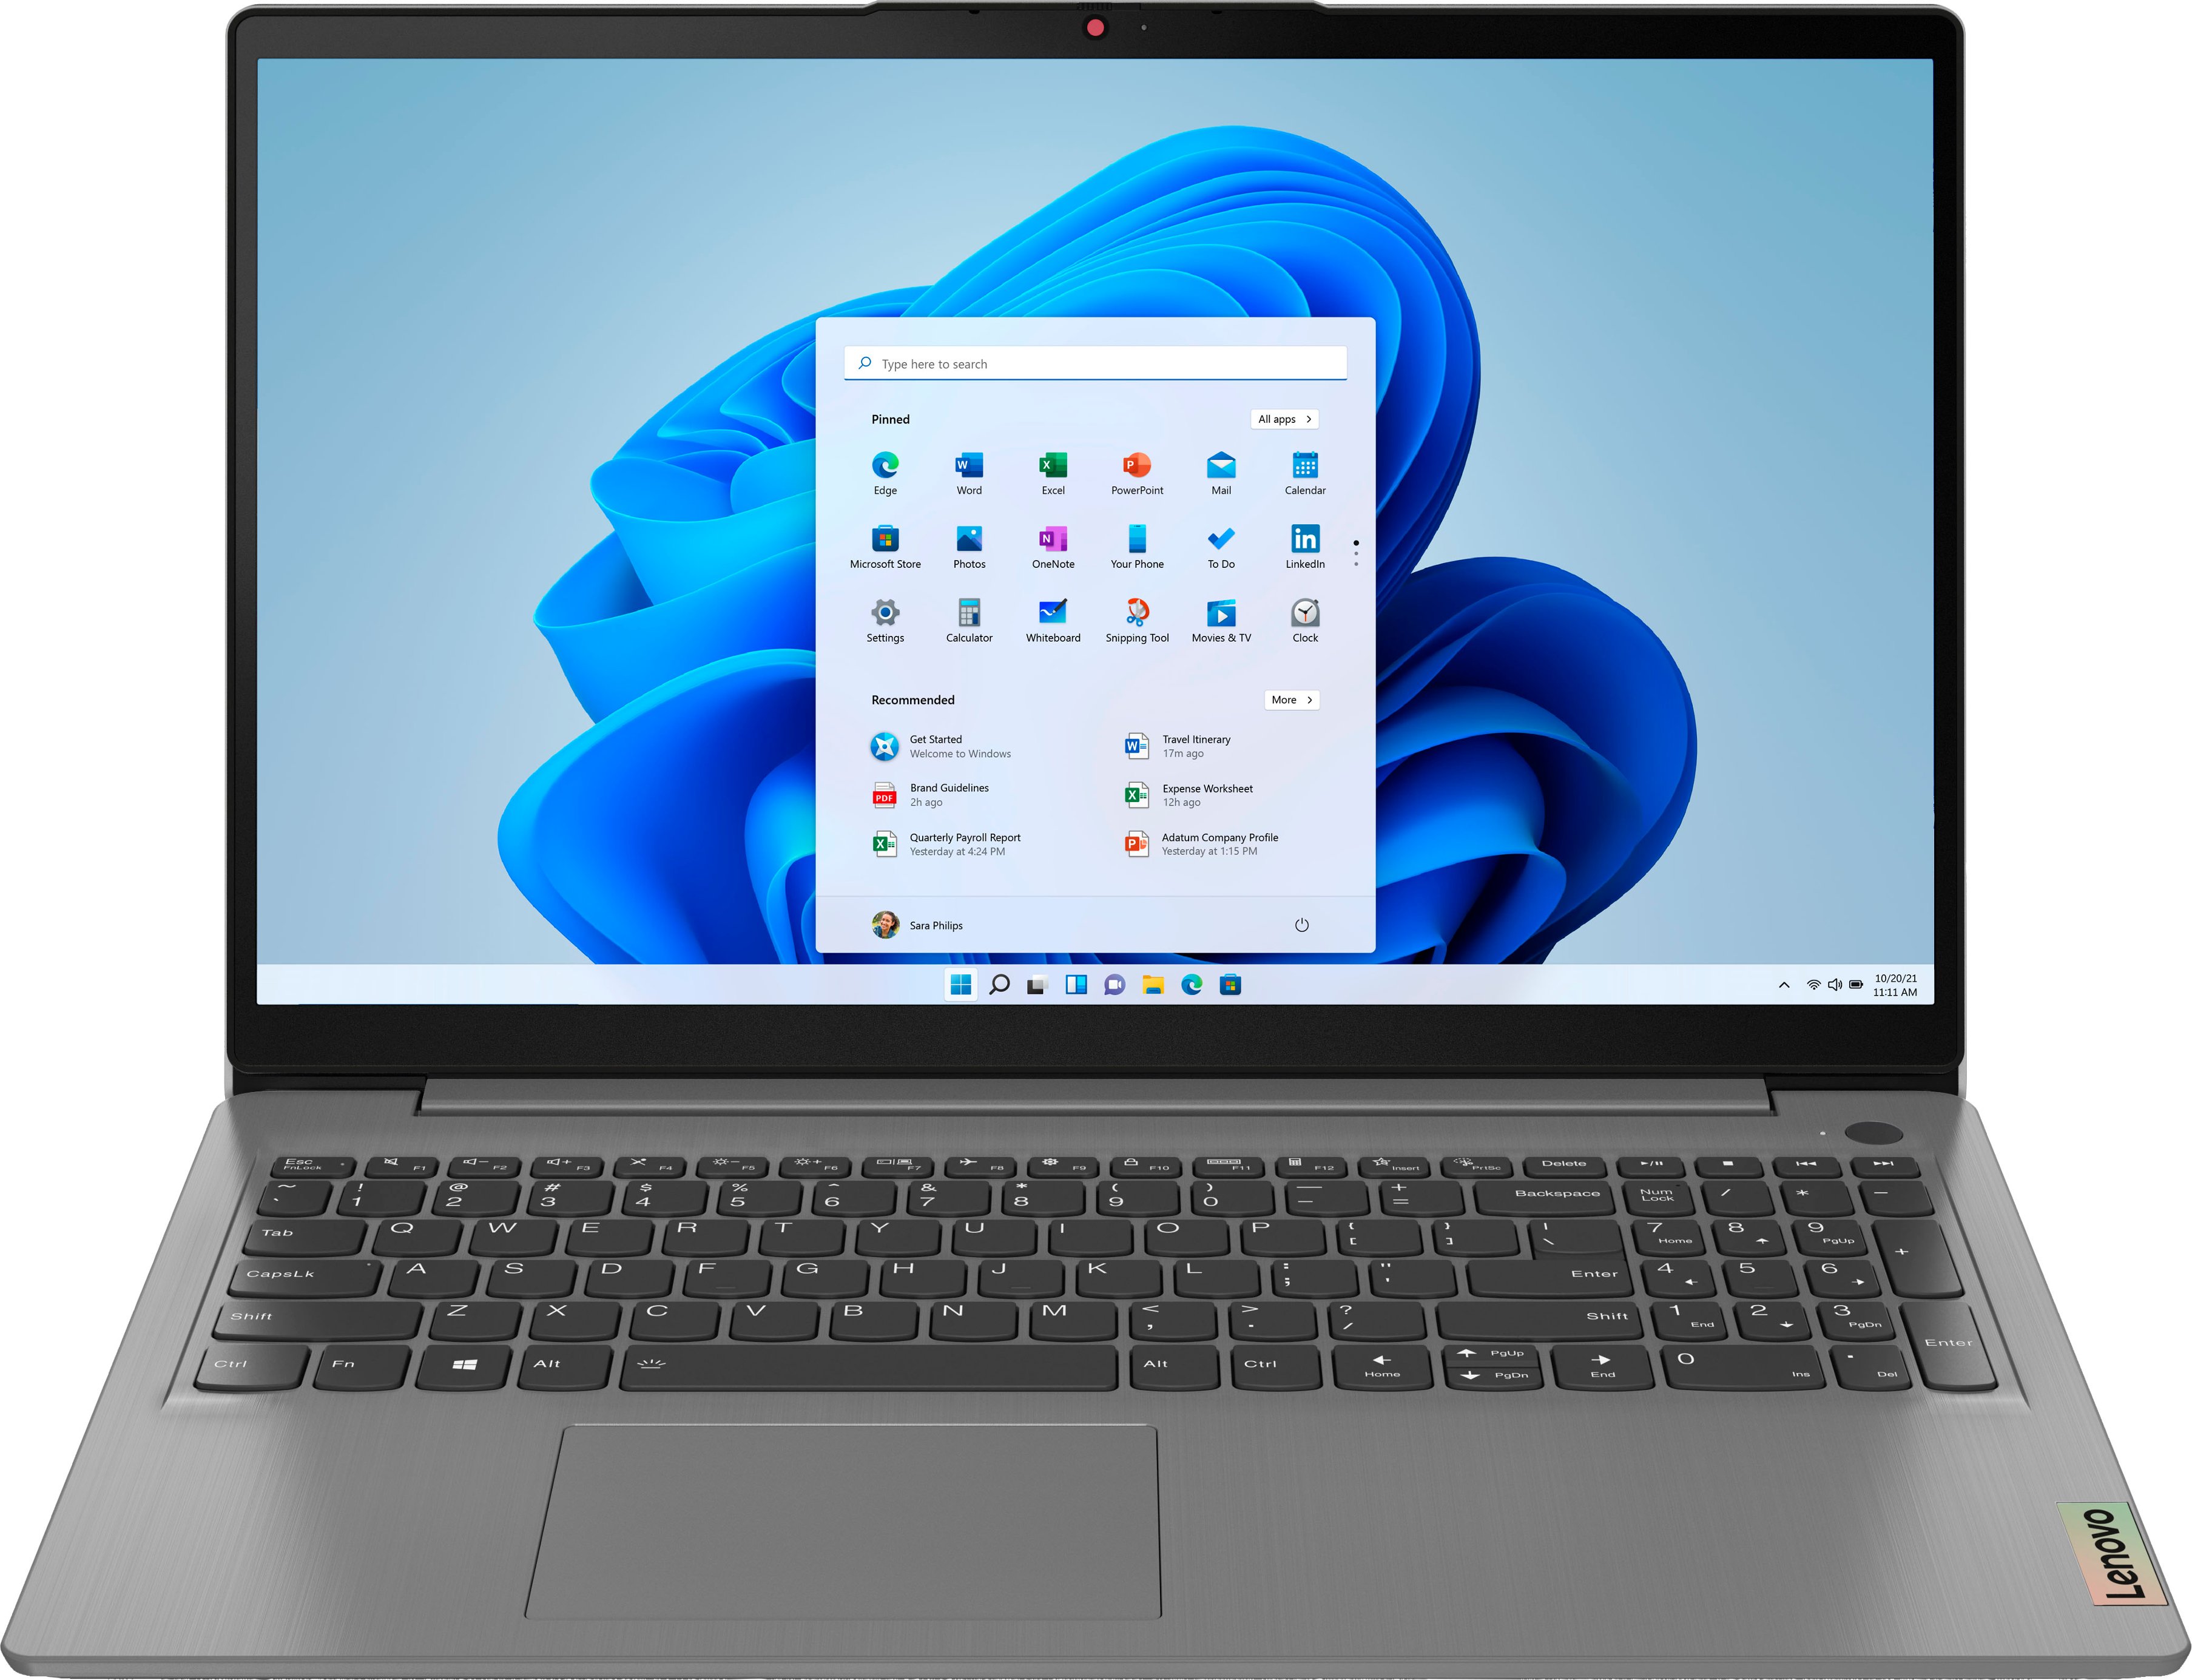 Lenovo Ideapad 3 (Open-Box Excellent): 15.6" FHD IPS 300-nits Touch Screen, i5-1135G7, 12GB DDR4, 256GB SSD $463.99